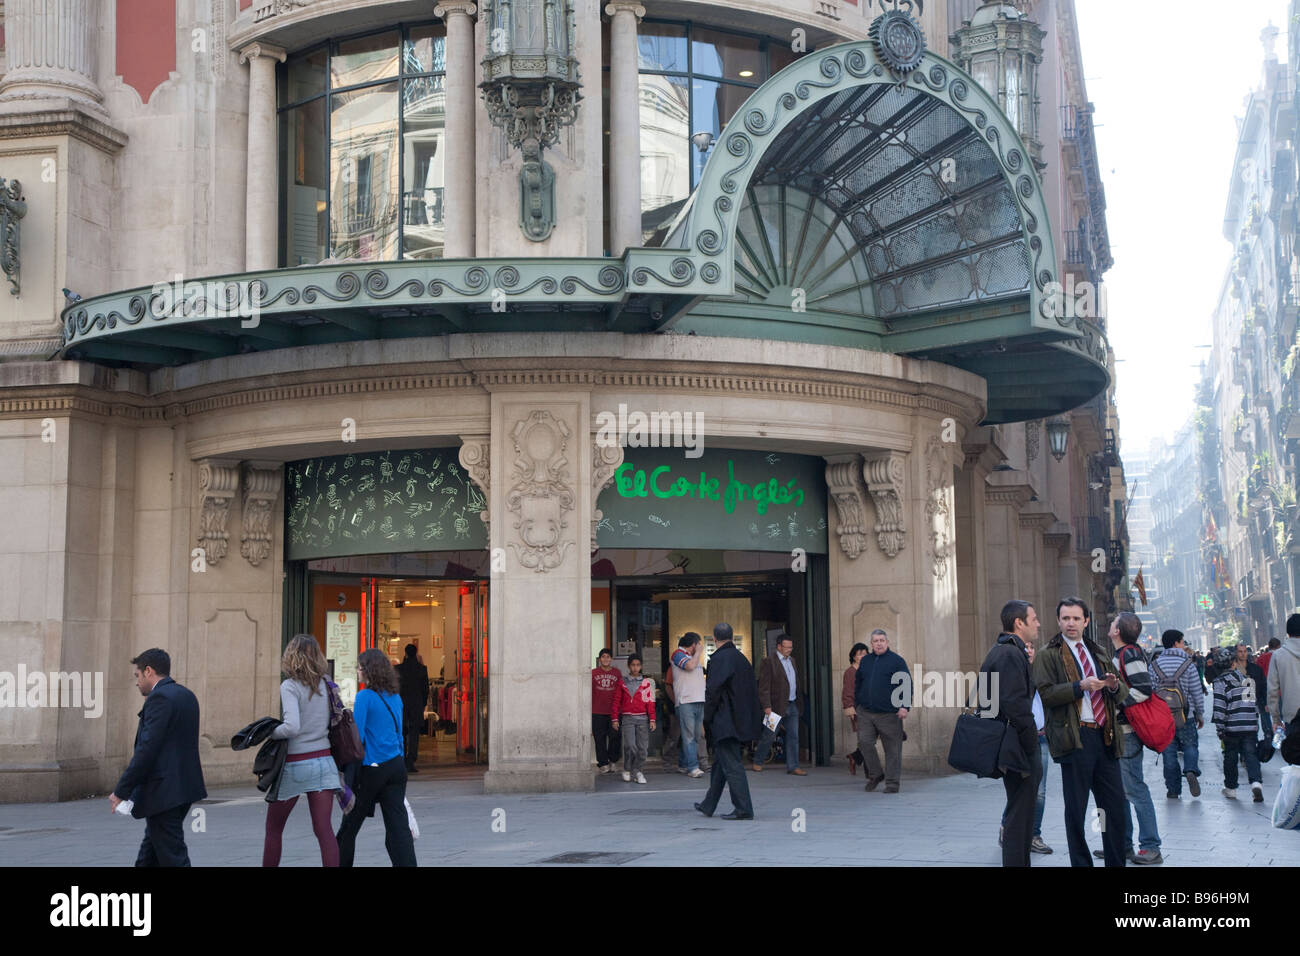 El Corte Ingles, grand magasin, Shopping, Barcelone Banque D'Images